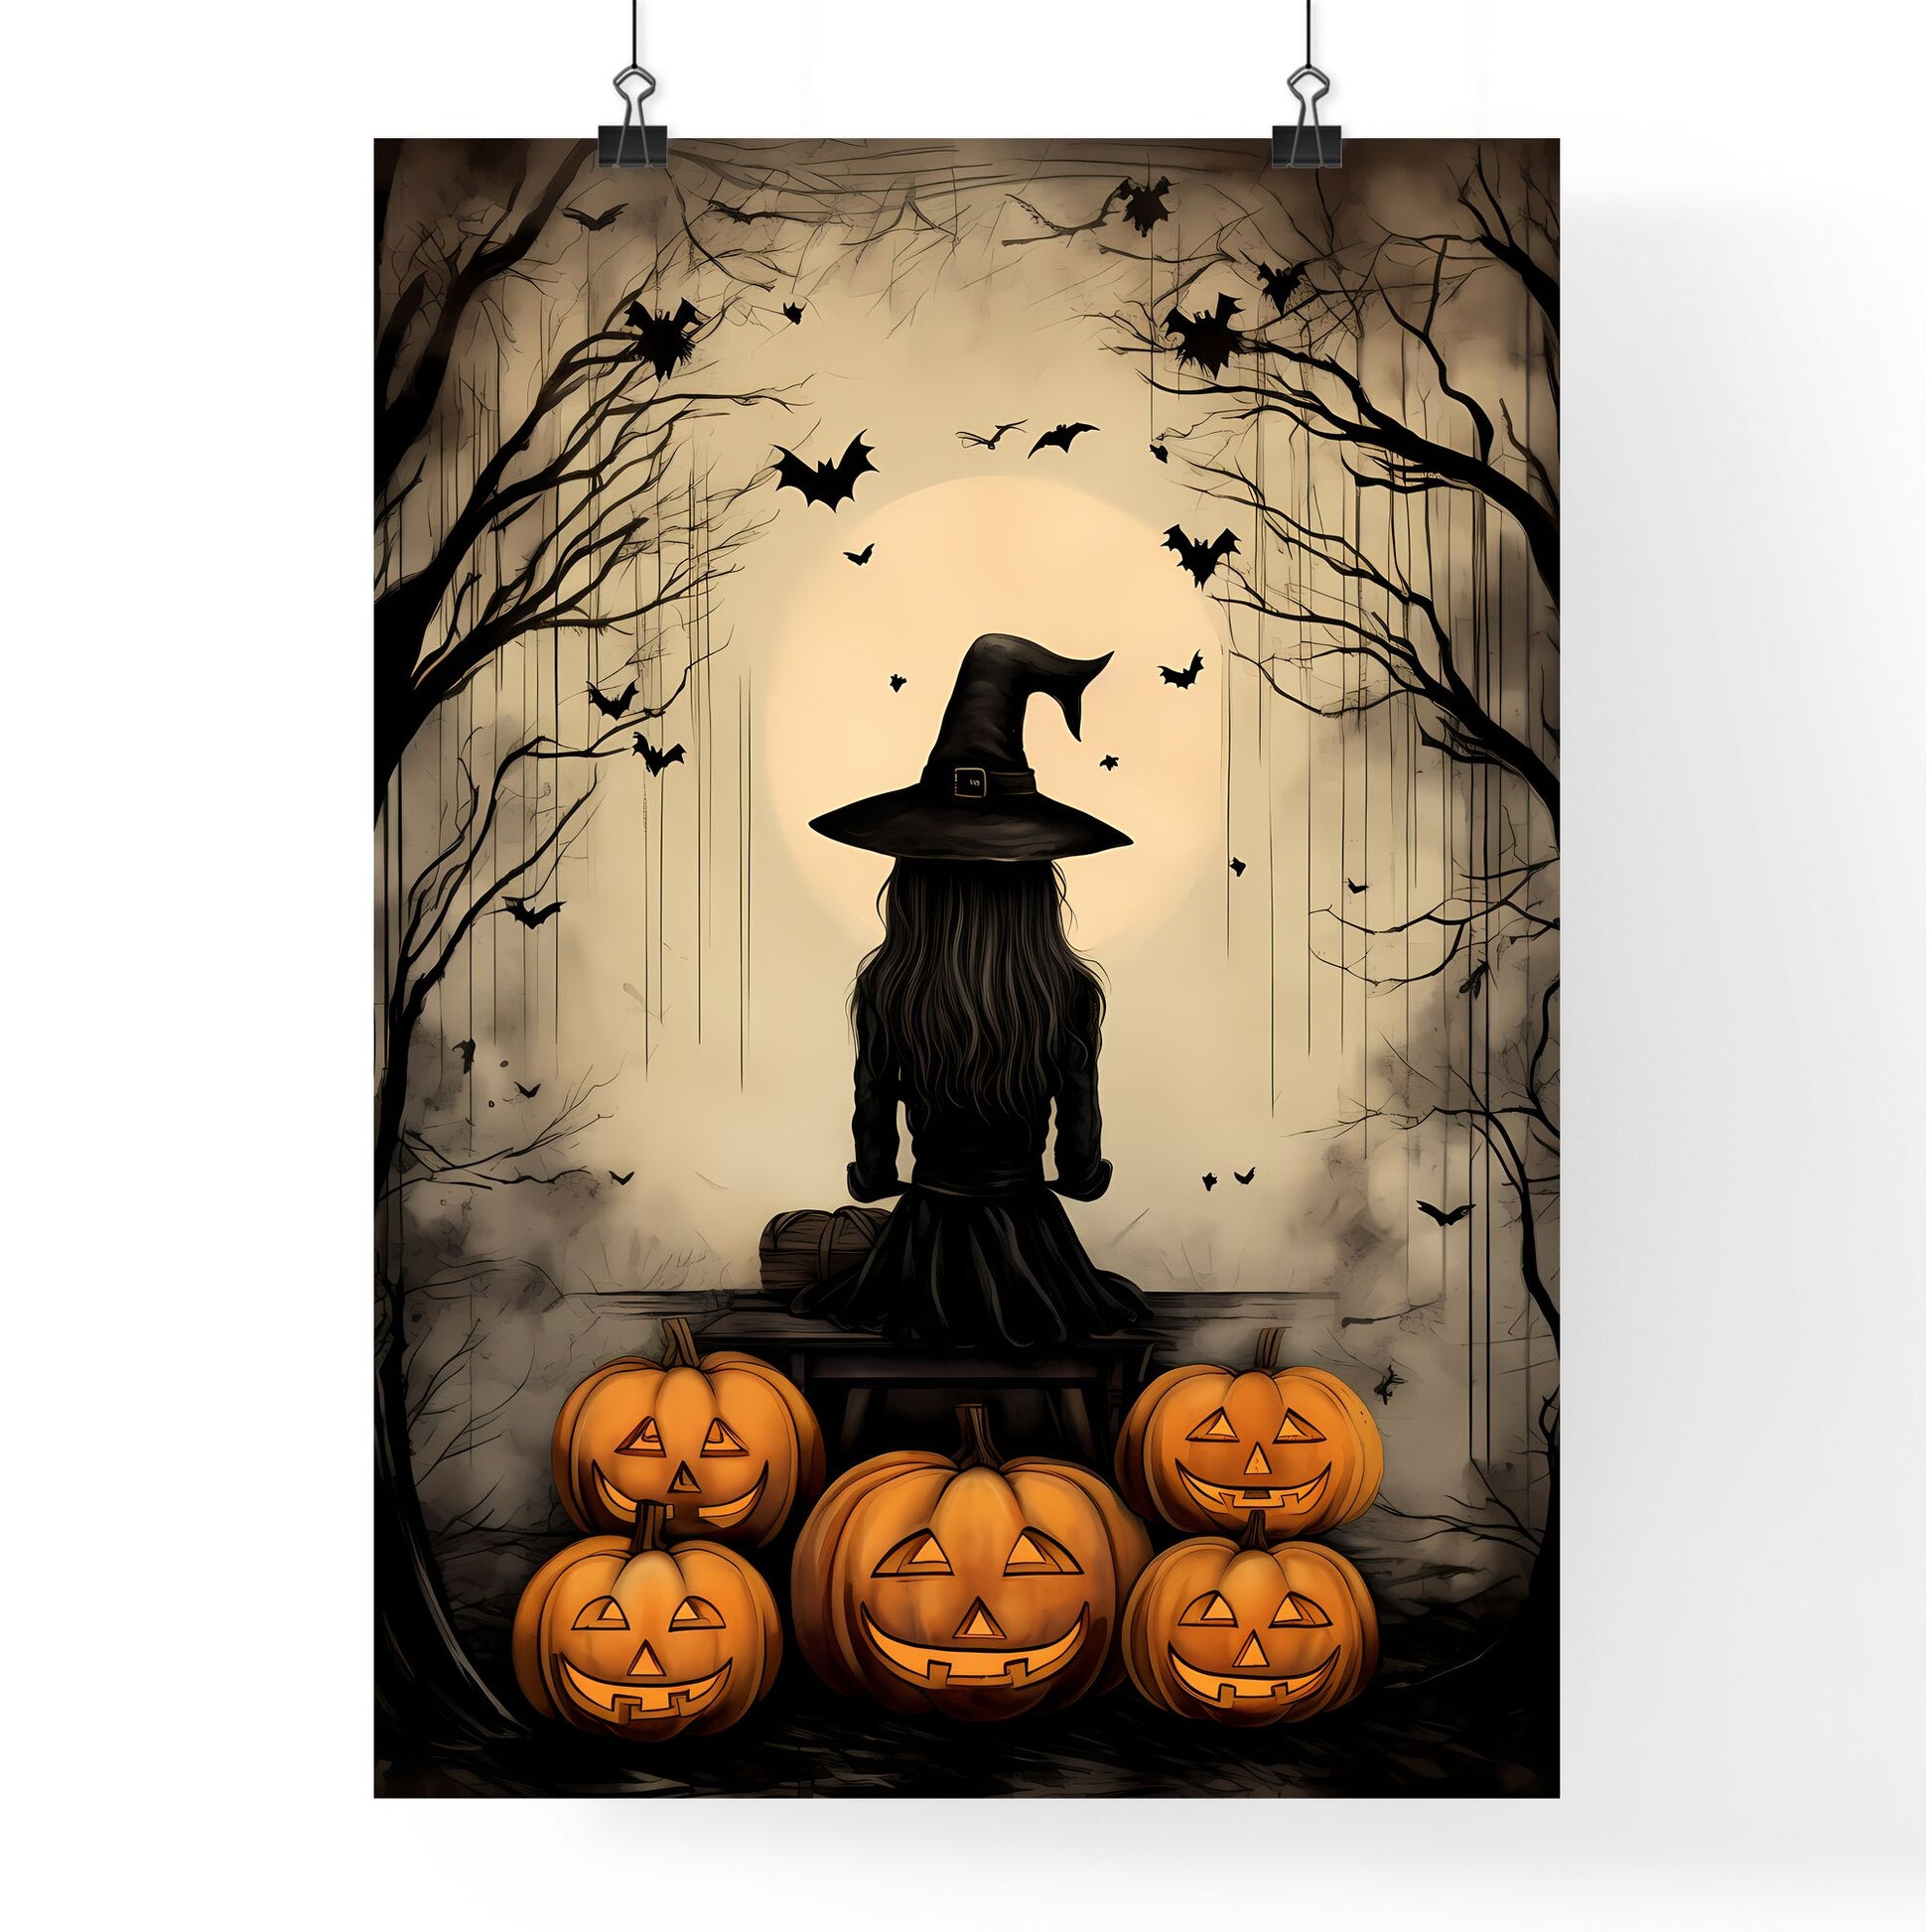 Girl In A Person Garment Sitting On A Bench With Pumpkins And Bats Art Print Default Title